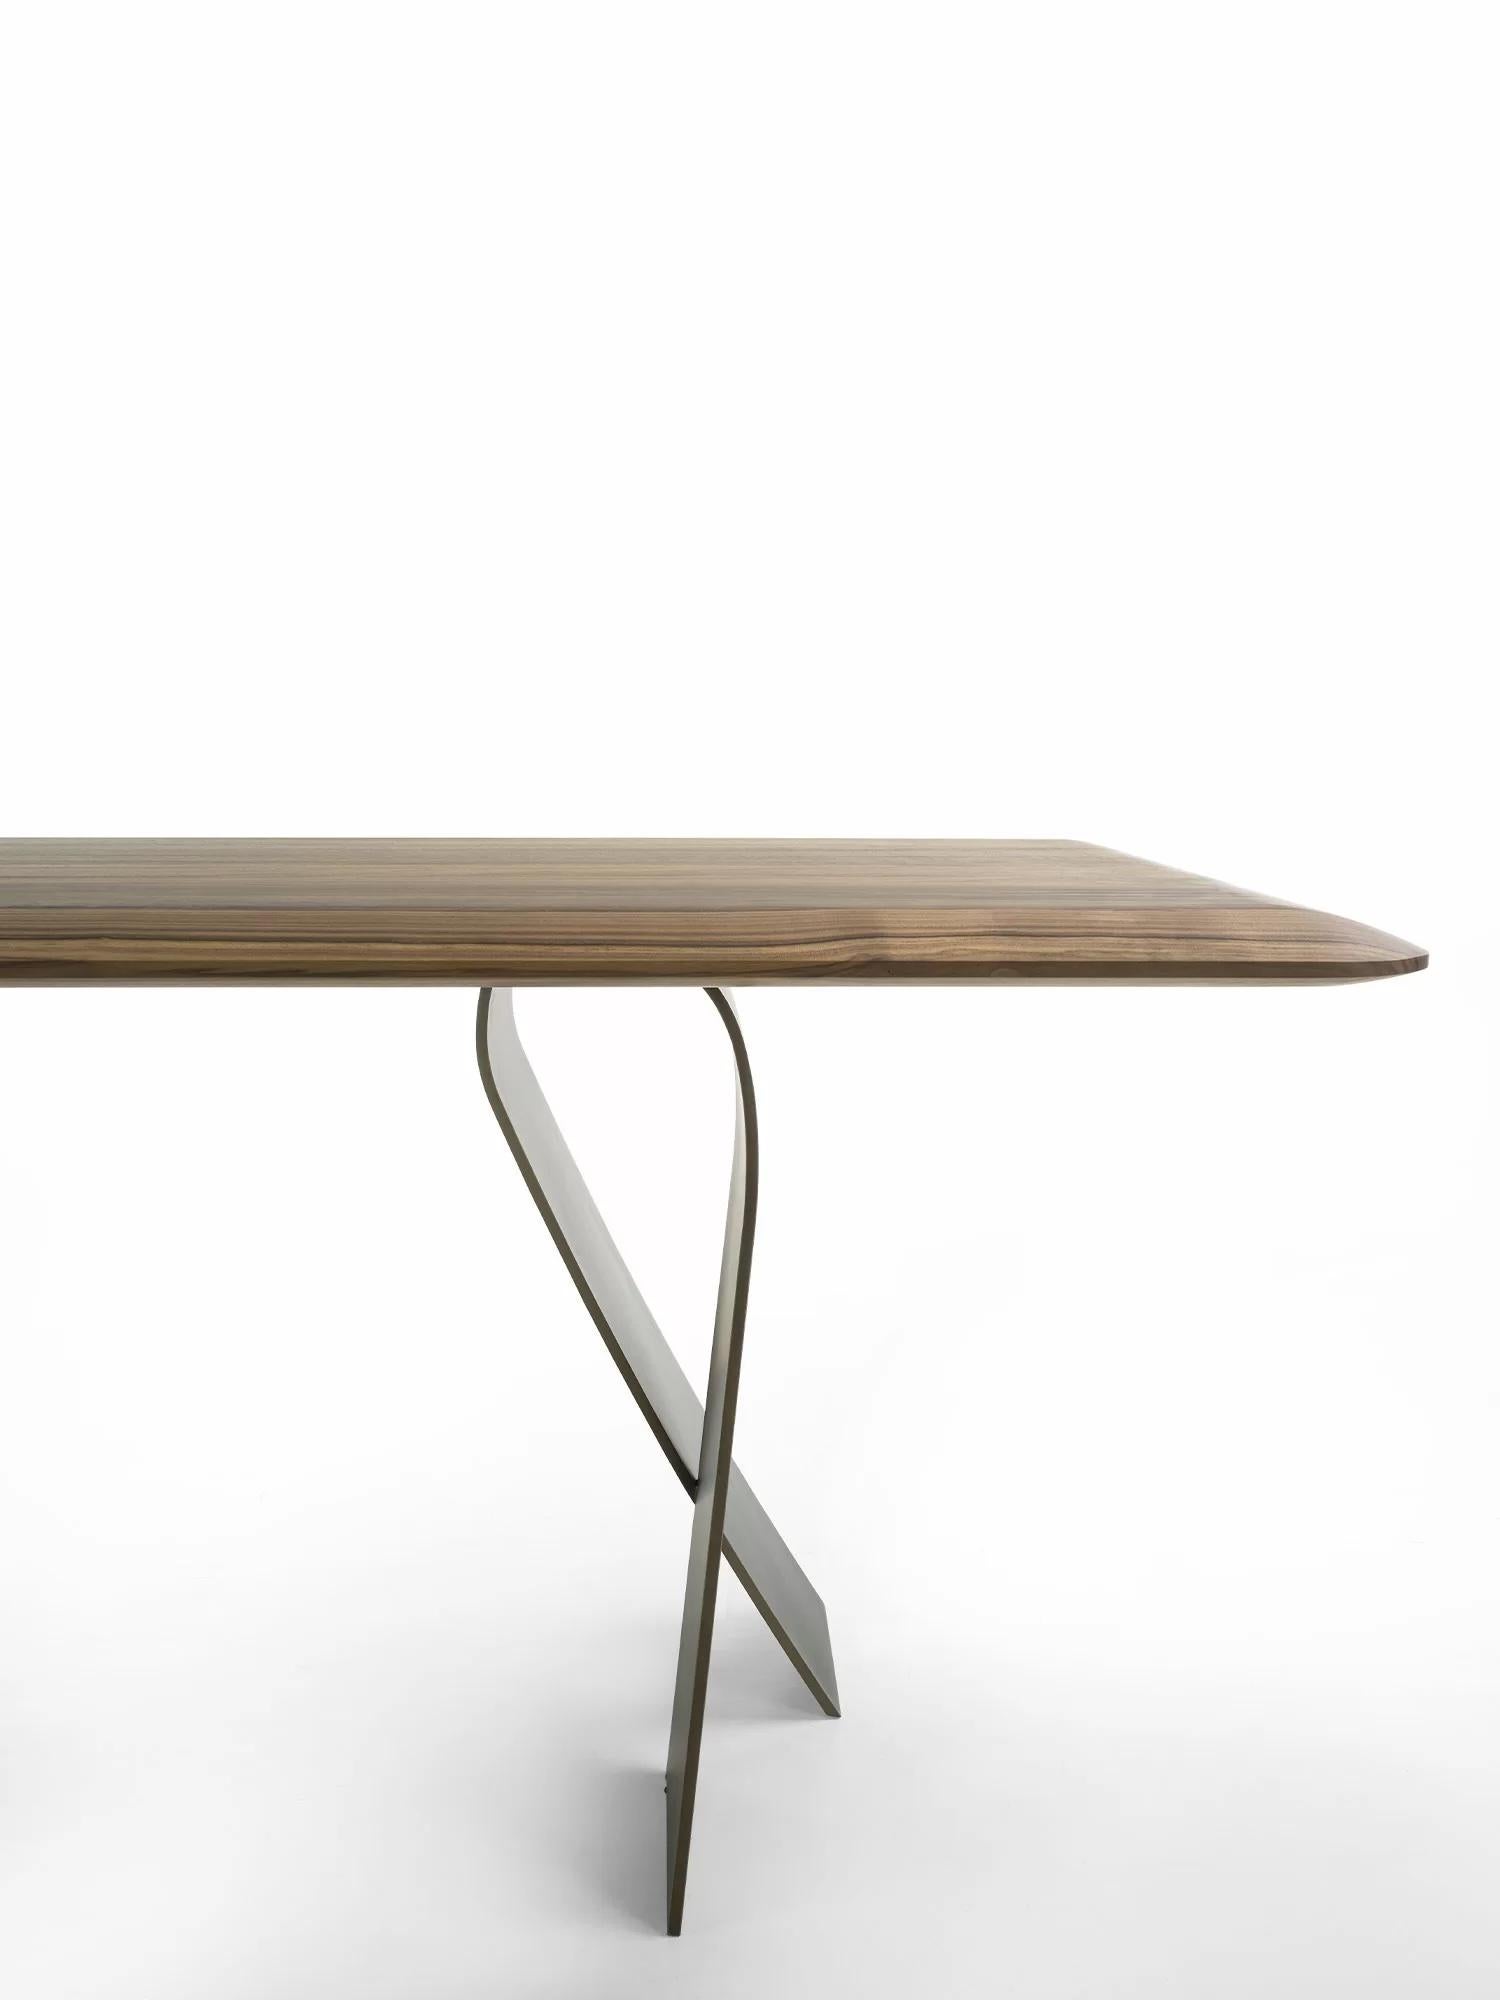 Nastro Wood & Iron Dining Table, Designed by Carlesi Tonelli, Made in Italy For Sale 1